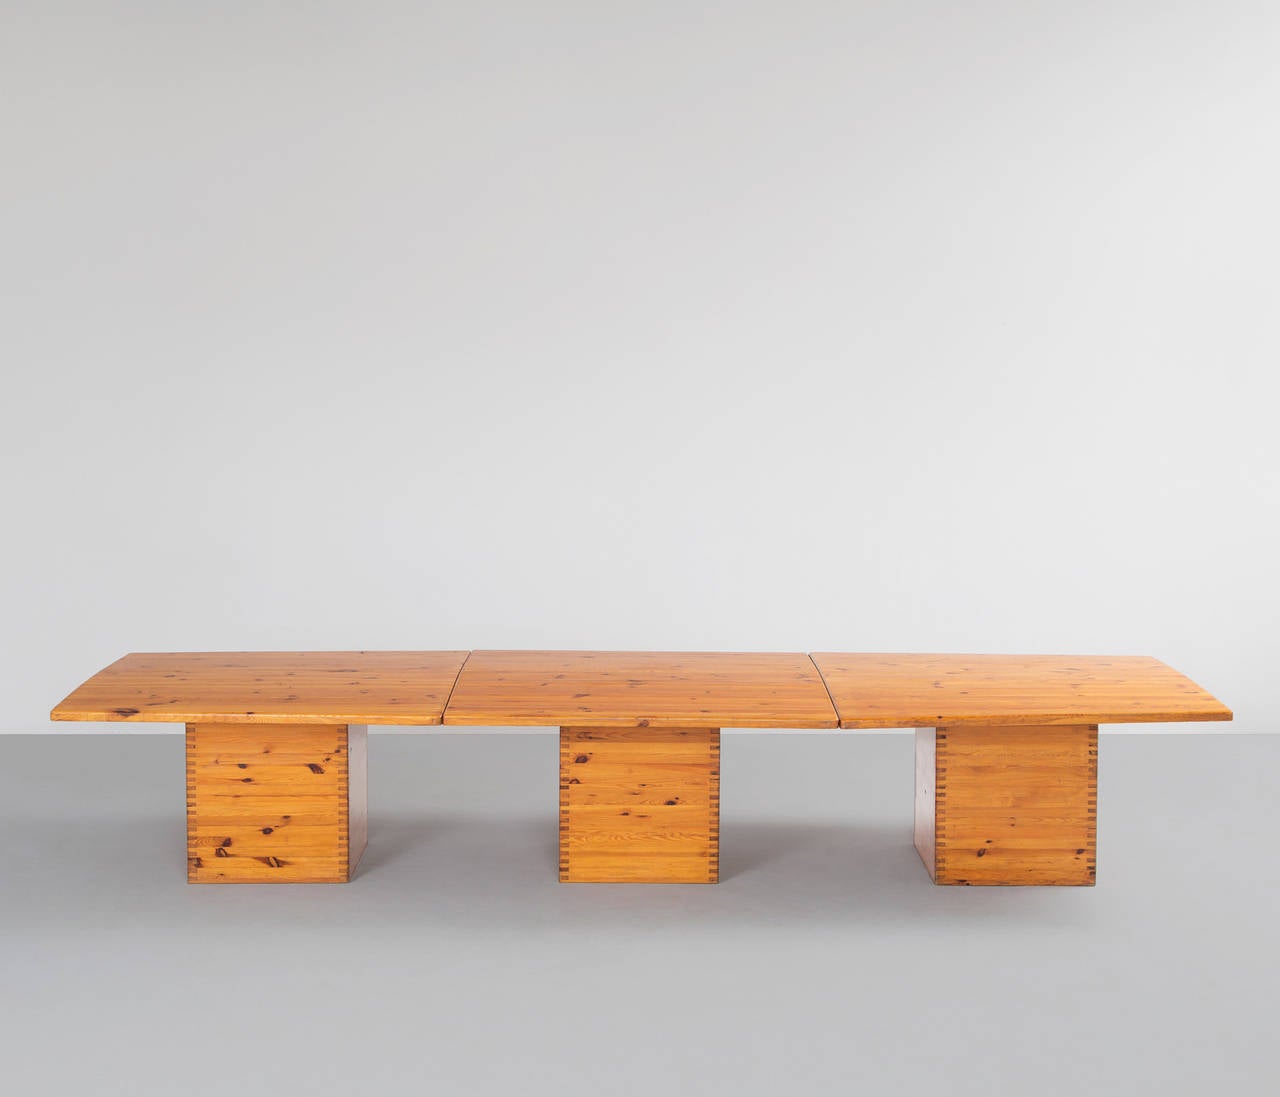 Group of Three Tables in pine by Ilmari Tapiovaara, Finland, 1950s.
 
The three tables assembled create a single, very large table in solid pine designed in the 1950s by Ilmari Tapiovaara. The table shows a breathtaking quality and has a very